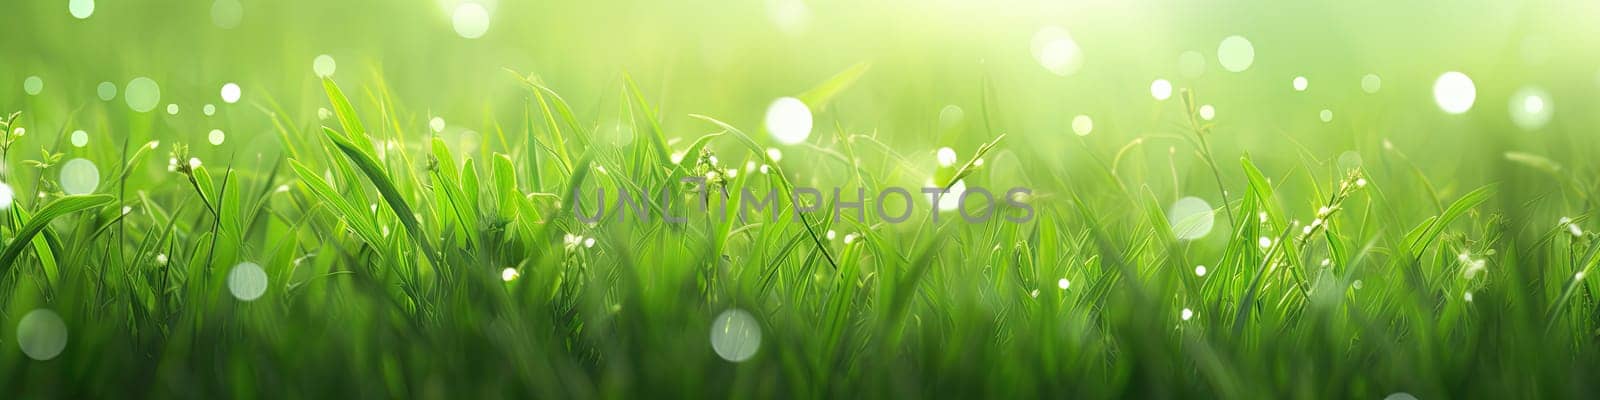 Green grass and sunlight banner background by Kadula